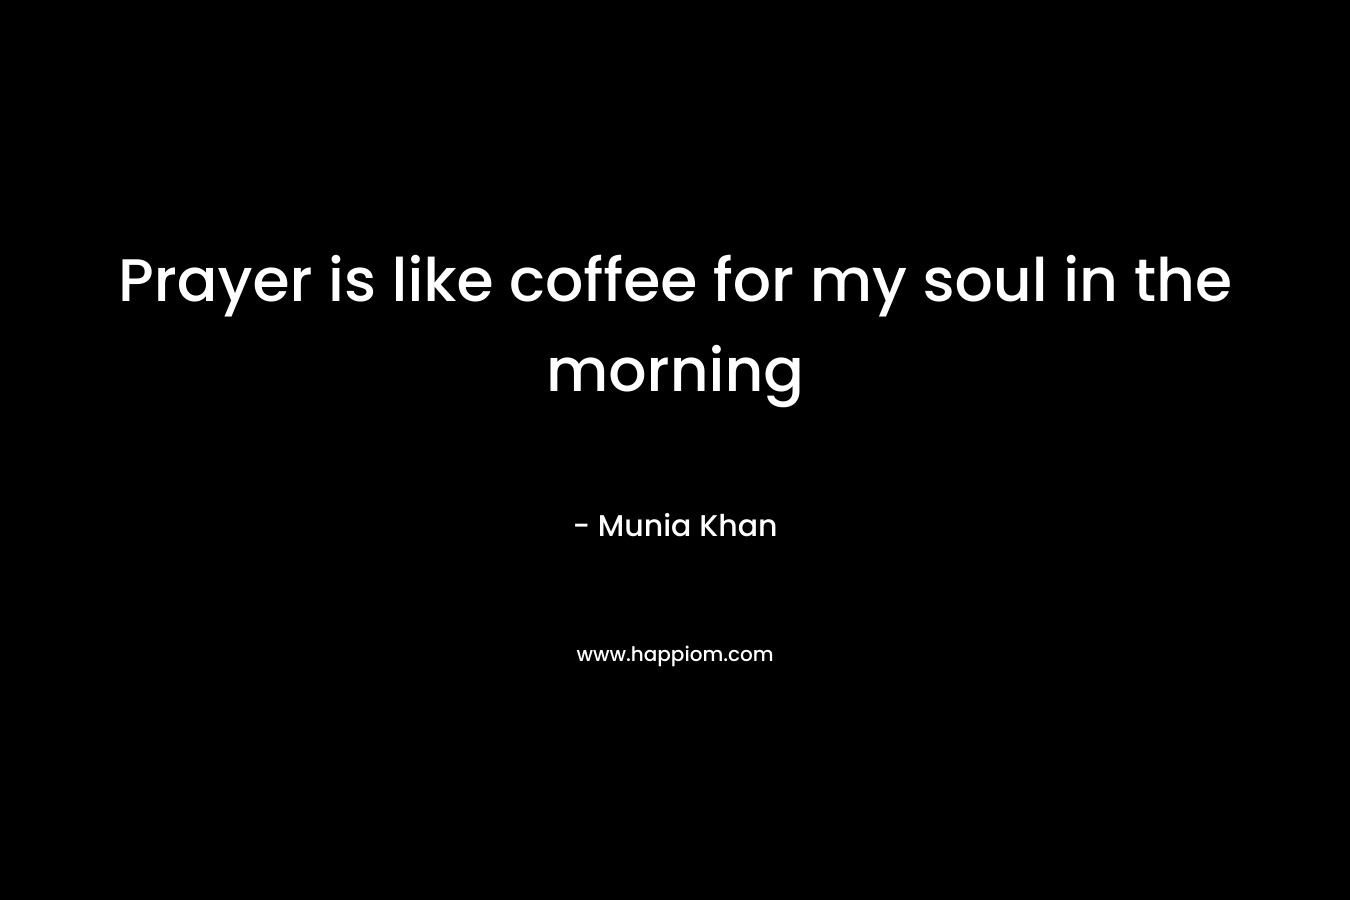 Prayer is like coffee for my soul in the morning